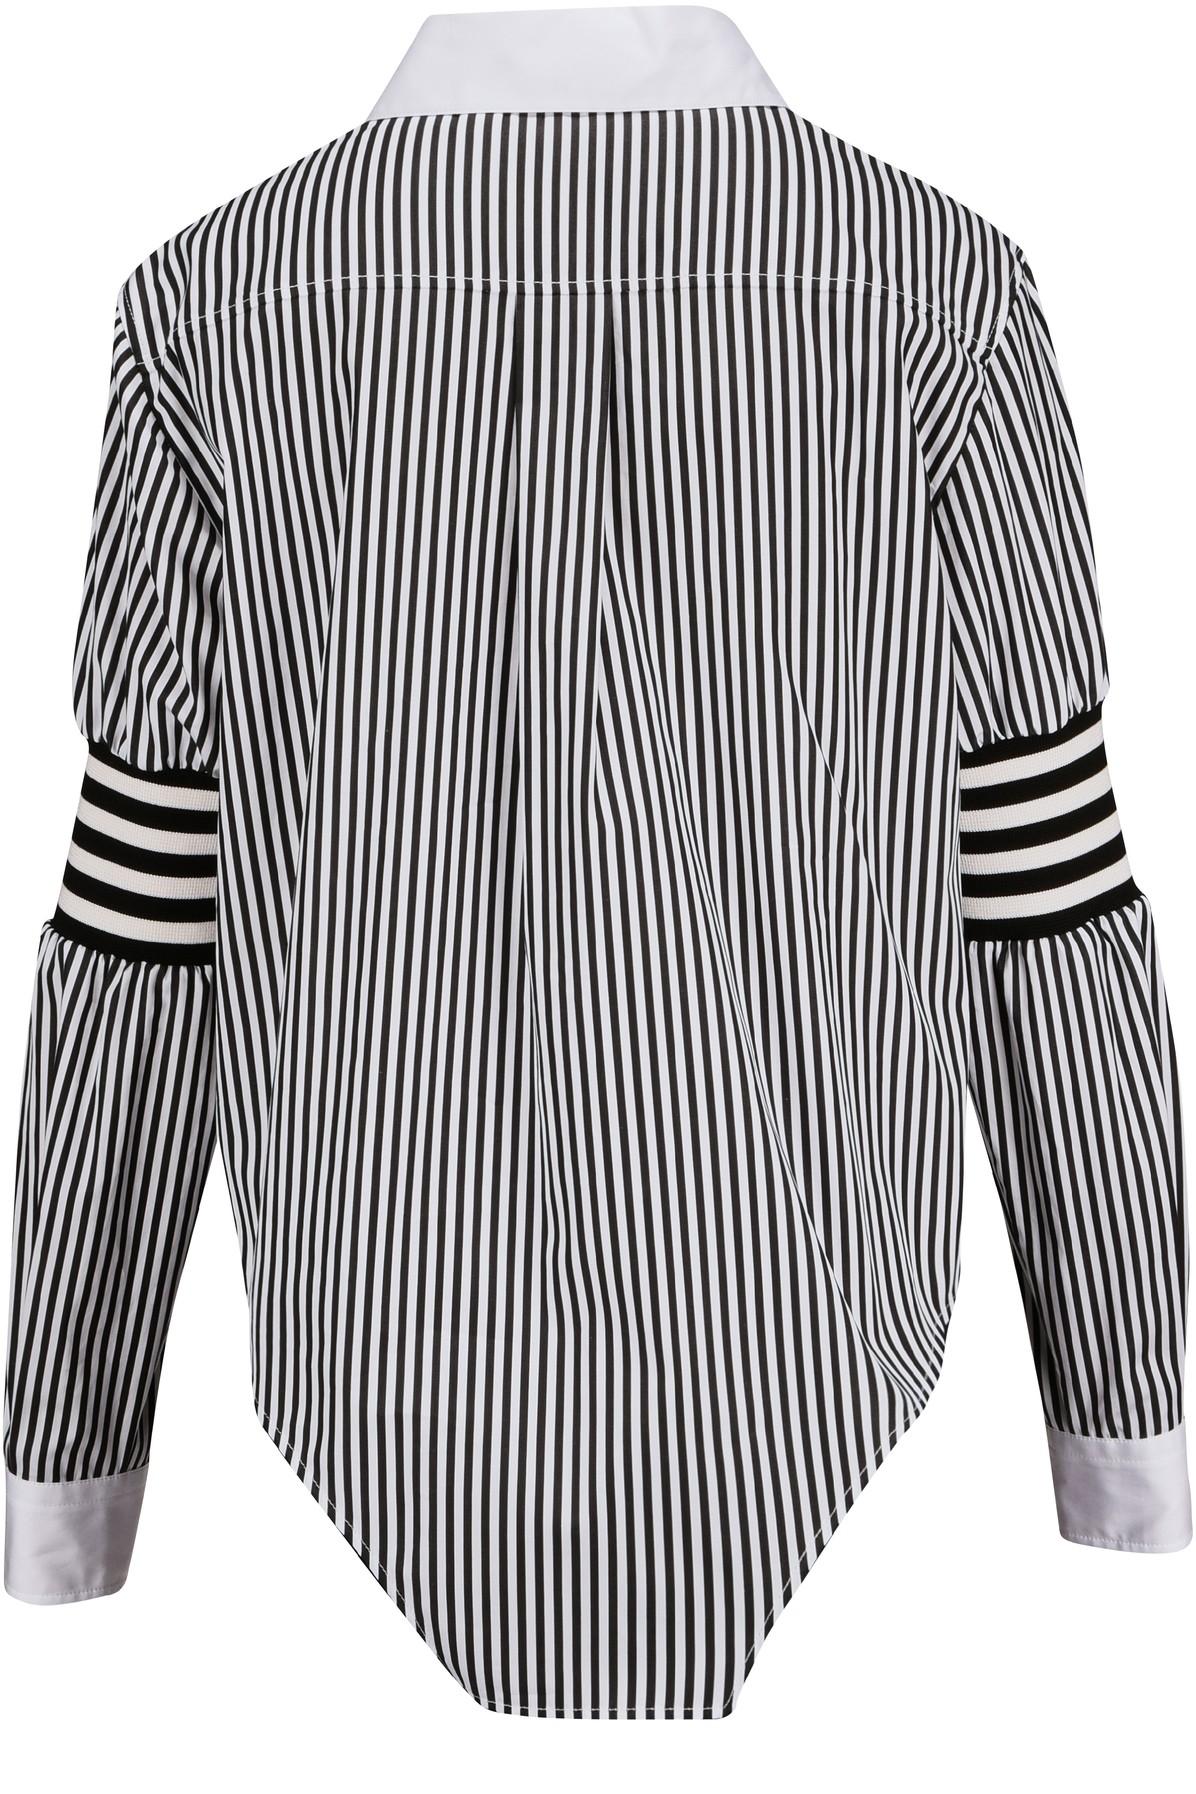 Burberry Asymetric Shirt With Stripes - Lyst